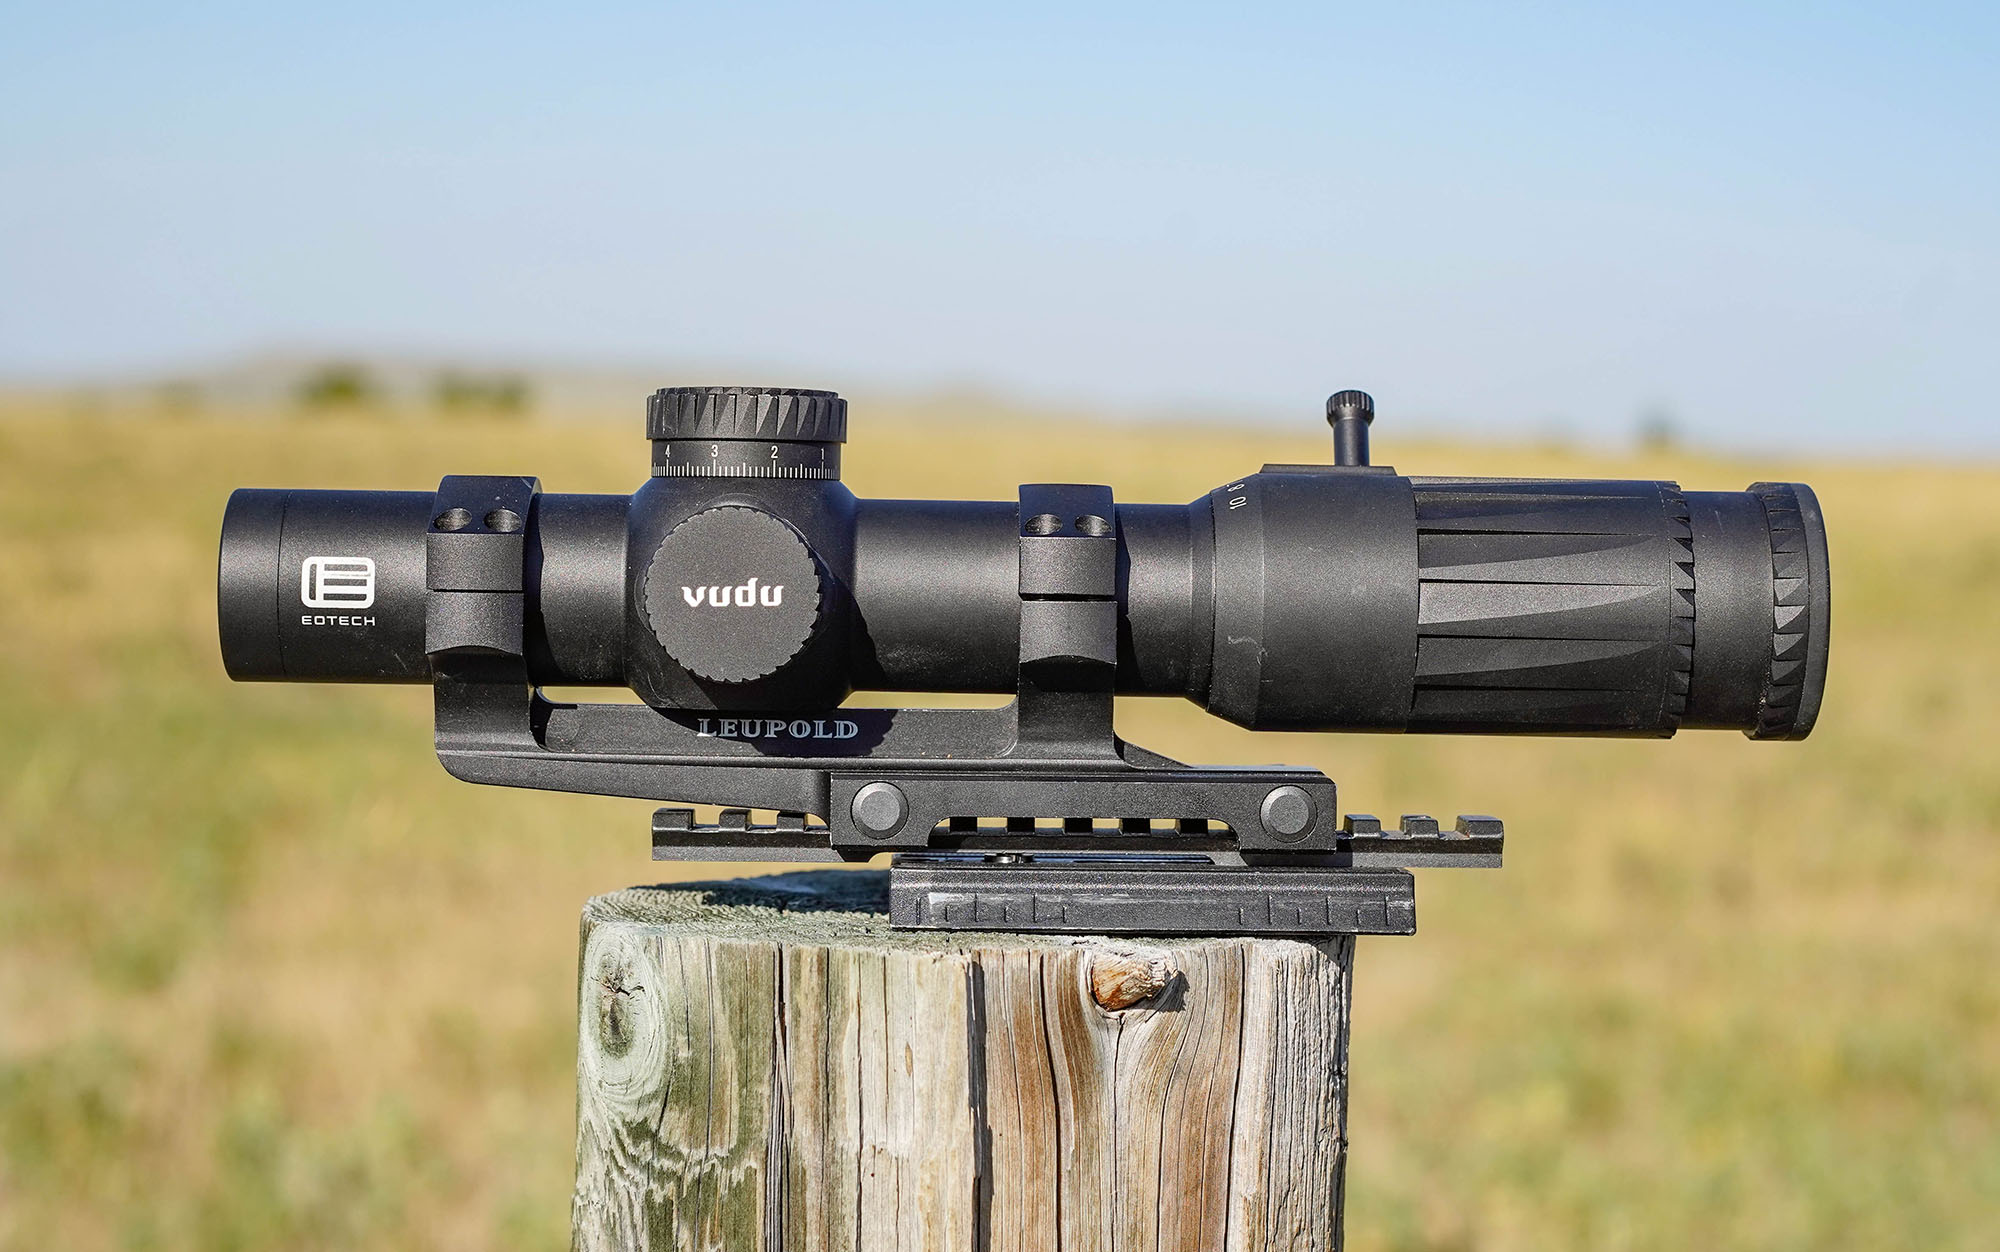 We tested the EOTech Vudu 1-10x28.